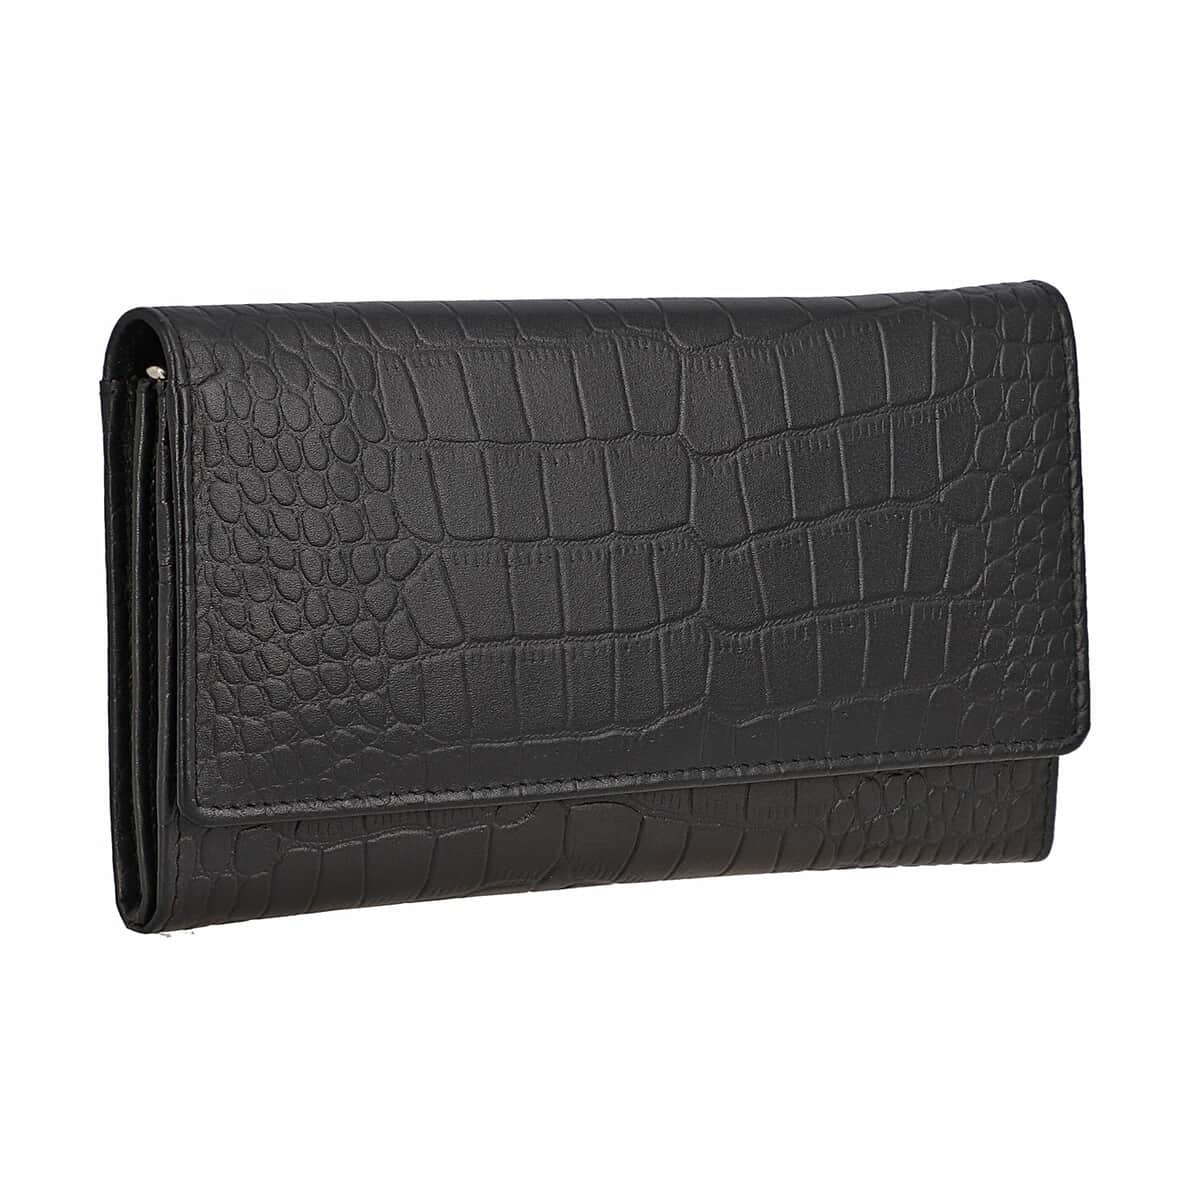 "100% Genuine Leather Wallet SIZE: 7.5(L)x4.5(W)x0.5(H) inches COLOR: Black" image number 2